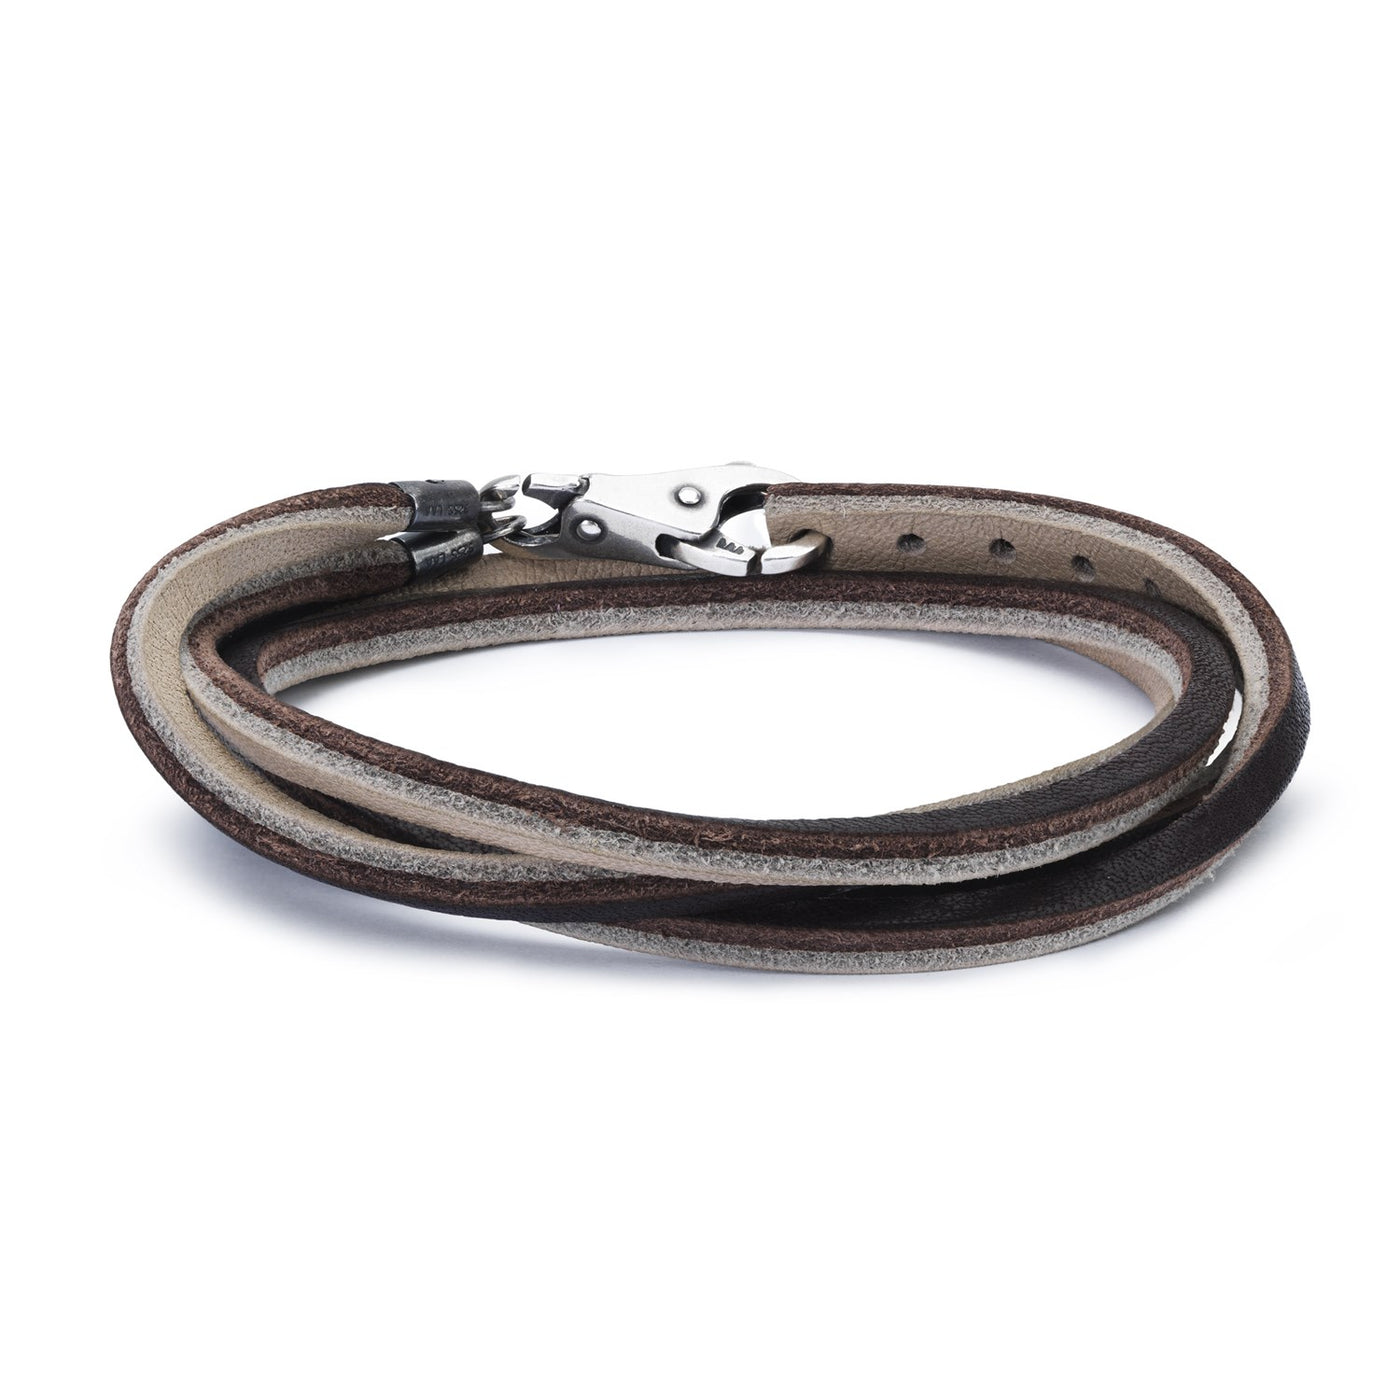 Leather Bracelet Brown/Light Grey with Sterling Silver Plain Lock